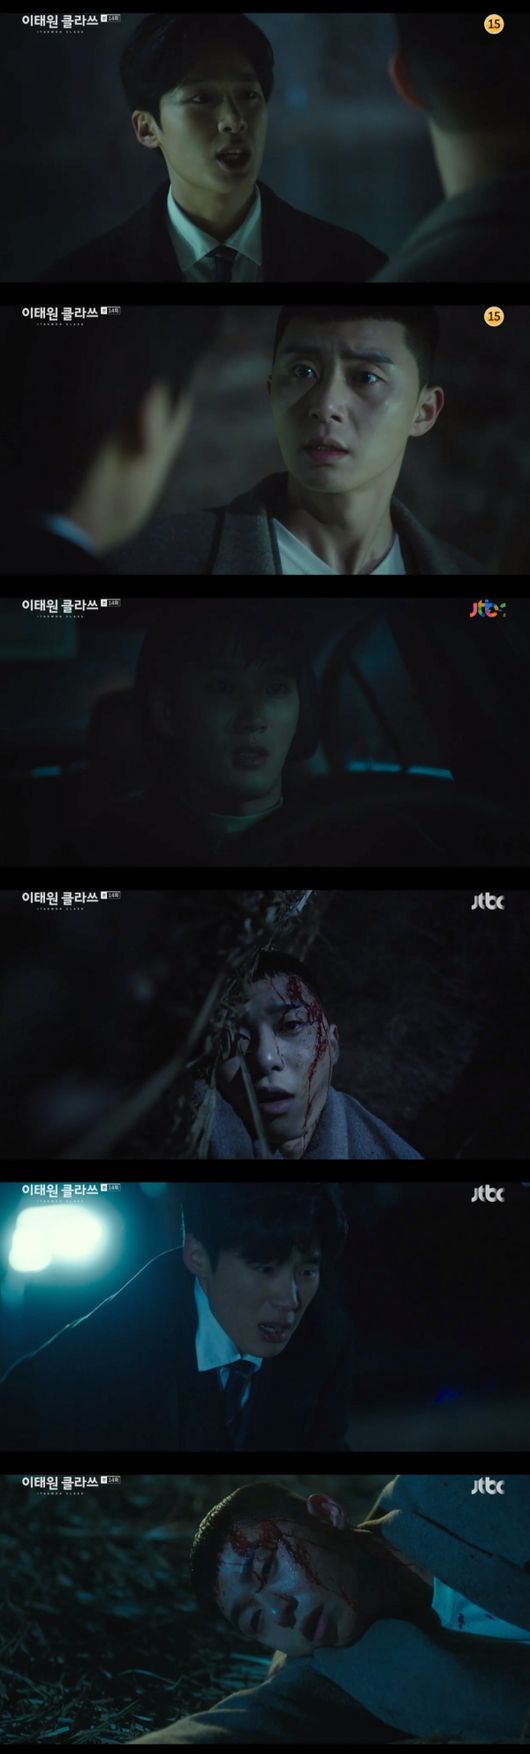 Itaewon Clath Park Seo-joon was hit by a car on behalf of Kim Dong-hee while he was aware of his mind toward Kim Da-mi.In the JTBC gilt drama Itaewon Klath (playplayplay by Gwangjin, directed by Kim Sung-yoon), which was broadcast on the 14th, Park Sae-ro-yi (Park Seo-joon) realized his love for Joy Seo (Kim Da-mi) was broadcast.Park Sae-ro-yi found Joysers office; Joyser was exhausted and asleep while working.Park Sae-ro-yi covered his outerwear to Joyser, and at that moment Joyser broke.Park Sae-ro-yi told Joy that Jang Dae-hee (Yoo Jae-myeong) had pancreatic cancer.Park Sae-ro-yi, Joy, Kang Min-jung (Kim Hye-eun) and Lee Ho-jin (Lee Da-wit) gathered in one place.Before Jang Dae-hee handed over his position to Jang Geun-soo (Kim Dong-hee), he decided to dismiss him from the presidency.Park Sae-ro-yi was worried about the already busy Joycer over the Chinese contract, which then said: Just listen to one wish, just give me a date.Park Sae-ro-yi responded by pretending to be moderate.Park Sae-ro-yi was working with Joy, when he received a call from Oh Soo-ah (Kwon Na-ra).Someones out of love and is out all night, and some are flirting with a woman, said Joy, with Park Sae-ro-yi in a straight line, dont do that anymore, like I like it.I told him that you obviously do not see him as a woman. Park Sae-ro-yi hurriedly left and said, Why should I feel sorry? Why do I make this feeling?Joy, who was sullen, laughed immediately and said, I do not know why. I feel a little like a woman. I know the delegate best.I am now seen as a woman. Park Sae-ro-yi left the office in a panic.Park Sae-ro-yi and Oh Soo-ah met at a cafe in Itaewon; Oh Soo-ah asked Park Sae-ro-yi, Do I still like it?But Park Sae-ro-yi didnt answer, and Joyser came into the café where they were with Jang Geun-soo, whom he had come across.Joyser saw Park Sae-ro-yi with Oh Soo-ah and left the cafe; Park Sae-ro-yi was displeased to see such a Joy book.Oh Soo-ah had a gut feeling for Park Sae-ro-yis changed mind; Oh Soo-ah caught Park Sae-ro-yi trying to go.And asked, Do you like Seo-yool Lee? Oh Soo-ah said, Its 15 years, you have to make me white water, you have to like me.But Park Sae-ro-yi never said he liked it.Oh Soo-ah came across Jean, who was released early as a model, as well as Ahn, who had been drinking together.Jean asked Oh Soo-ah, Do you still like Park Sae-ro-yi? Oh Soo-ahs reaction was cold.I guess Im also going to have to be a terrible guy for you, Jean, the Fountainhead, said bitterly.On the day of the shareholders meeting, Joy was overworked. Joy was walking and fell down.Kang Min-jung and Lee Ho-jin, who heard the news, worried that Park Sae-ro-yi would not come to the shareholders meeting.Kang Min-jung ran into Jang Dae-hee in the lobby, who told Jang Dae-hee, I heard it was a lot sick. So Jang Dae-hee said, It would be a good card, but I did not use it.My health, my outside job, and my family. There is no doubt about that. But I always make the wrong choice.I should use it and throw it away, not put it on top.The meeting was held at the meeting of shareholders, which was held outside the board of directors. The result was rejected.While it was a priority to soothe shareholders, Park Sae-ro-yi headed straight to the hospital.Joyser was told of the rejection and immediately tried to meet shareholders, Park Sae-ro-yi told Joyser: Take a break - if you move now, youre fired.Park Sae-ro-yi left the hospital with Choi Seung-kwon (Ryu Kyung-soo).Choi Seung-kwon noticed Park Sae-ro-yis mind and advised him to do what he wants, and Park Sae-ro-yi was aware of his feelings for Joy again.Park Sae-ro-yi bought a necklace that Joy had said he wanted to have and went back to the hospital, when he overheard Joyser talking to Ma Hyun-yi (Lee Joo-young).Joy said, I confess that I love you. I told you to cut off if your favorite mind is a reason for dismissal.The reason I can express my affection to the representative is because I am a good worker and a necessary person.I have to be the person I need from the representative, who has to be around no matter what he says. Park Sae-ro-yi realized the vacancy in Joy; the most grateful, the most sorry, were all Joysers to Park Sae-ro-yi.The most frightening moment for him was when Joycer fell, and with the best luck of his life, he recalled when Joycer came to the moon.Park Sae-ro-yi thinks its all over you and finally realises he loves Joy.Park Sae-ro-yi headed straight to the hospital to see Joy, who also came to see Joys hospitalization; Park Sae-ro-yi told Jang Geun-soo, I understand.Shes the kind of woman whos willing to risk her life, she said.If you have a girls heart, you should fold it. But Ill do it. Traitor, trash. You can swear.I like Seo-yool Lee, he declared.Park Sae-ro-yi found Joysers ward; Joyser was kidnapped by a questionable man disguised as a nurse.Jang noticed this, too, and followed Park Sae-ro-yi. Everything was done by Jean Fountainhead.Excited, Jang tried to run at the Fountainhead, when the car rushed to Jang, who pushed him away and was hit by a car instead.Park Sae-ro-yi, while distracted, regretted pushing out Joy - and thought: I miss you crazy.Itaewon Klath captures broadcast screen